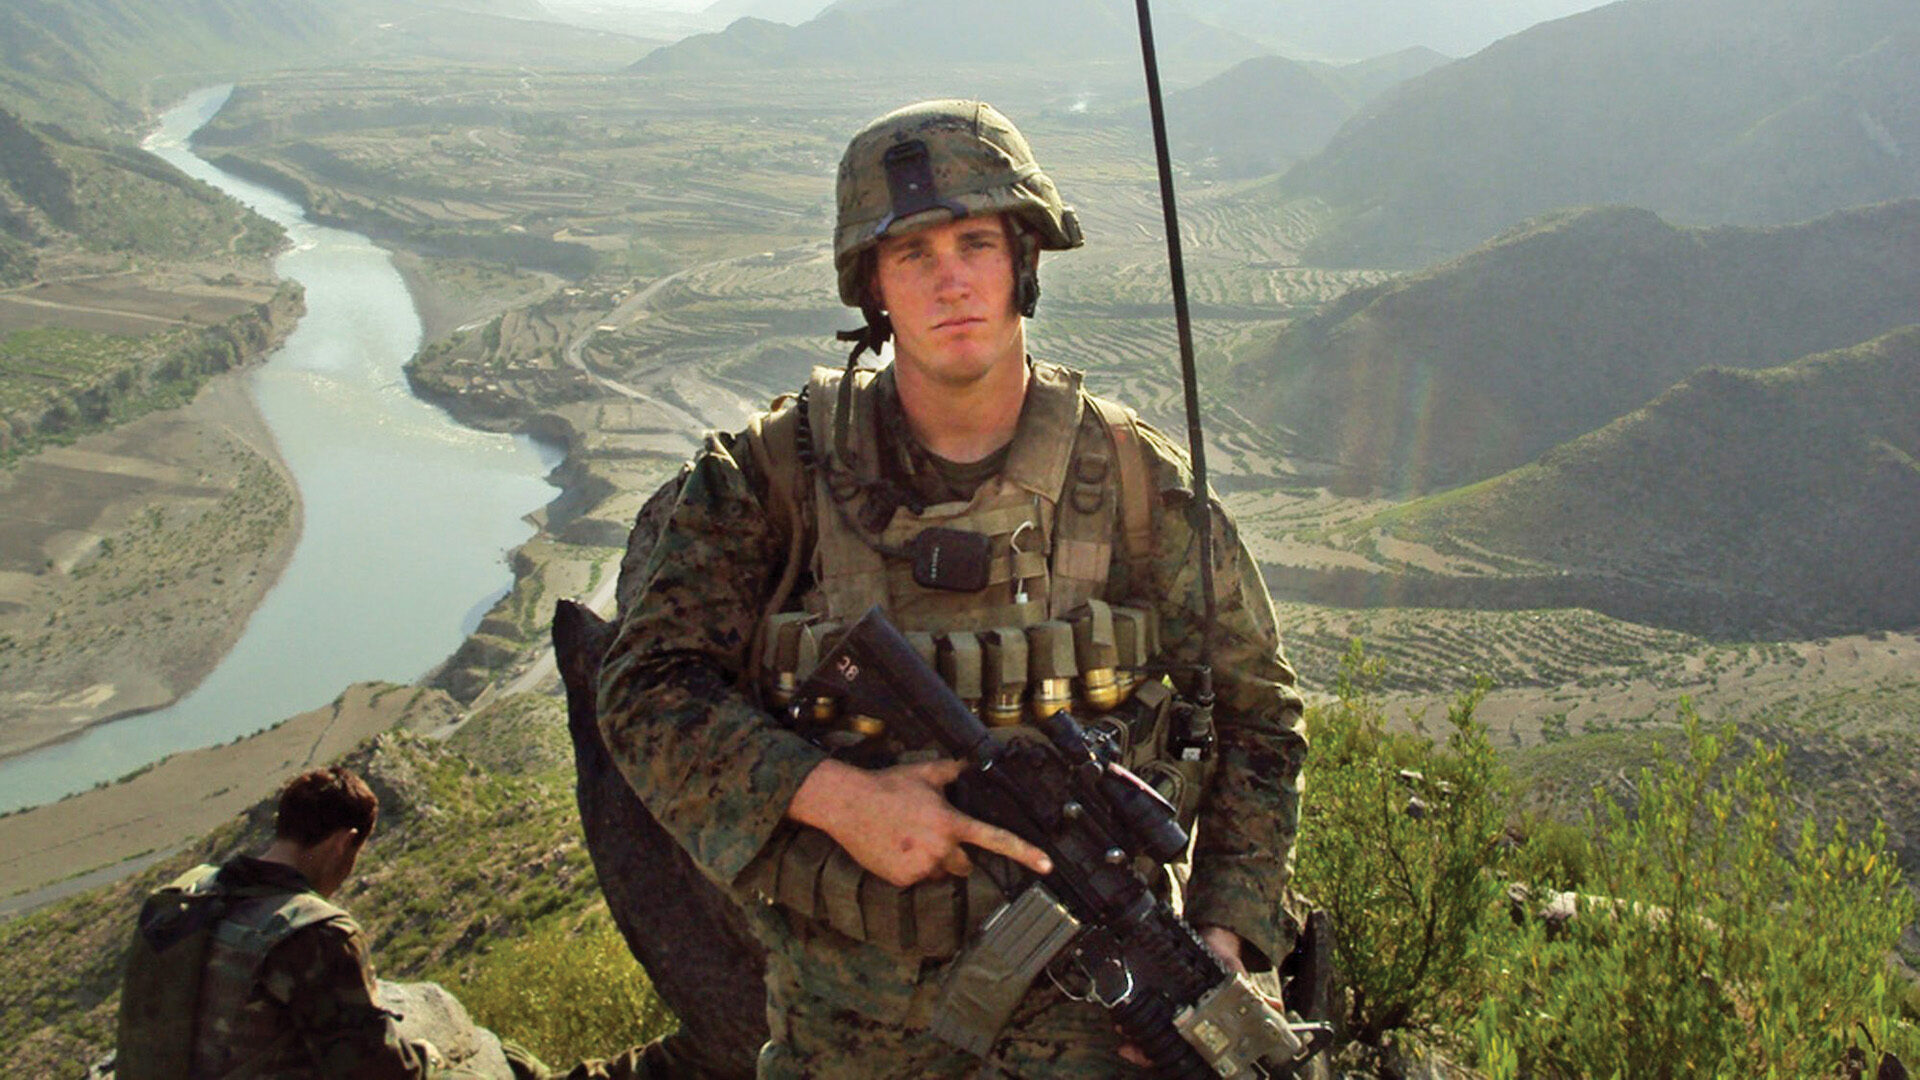 Marine Corporal Dakota Meyer, who trained Afghan National Security Forces in the use of weapons, took up a position with the quick reaction force during the security sweep of Ganjal village in September 2009.